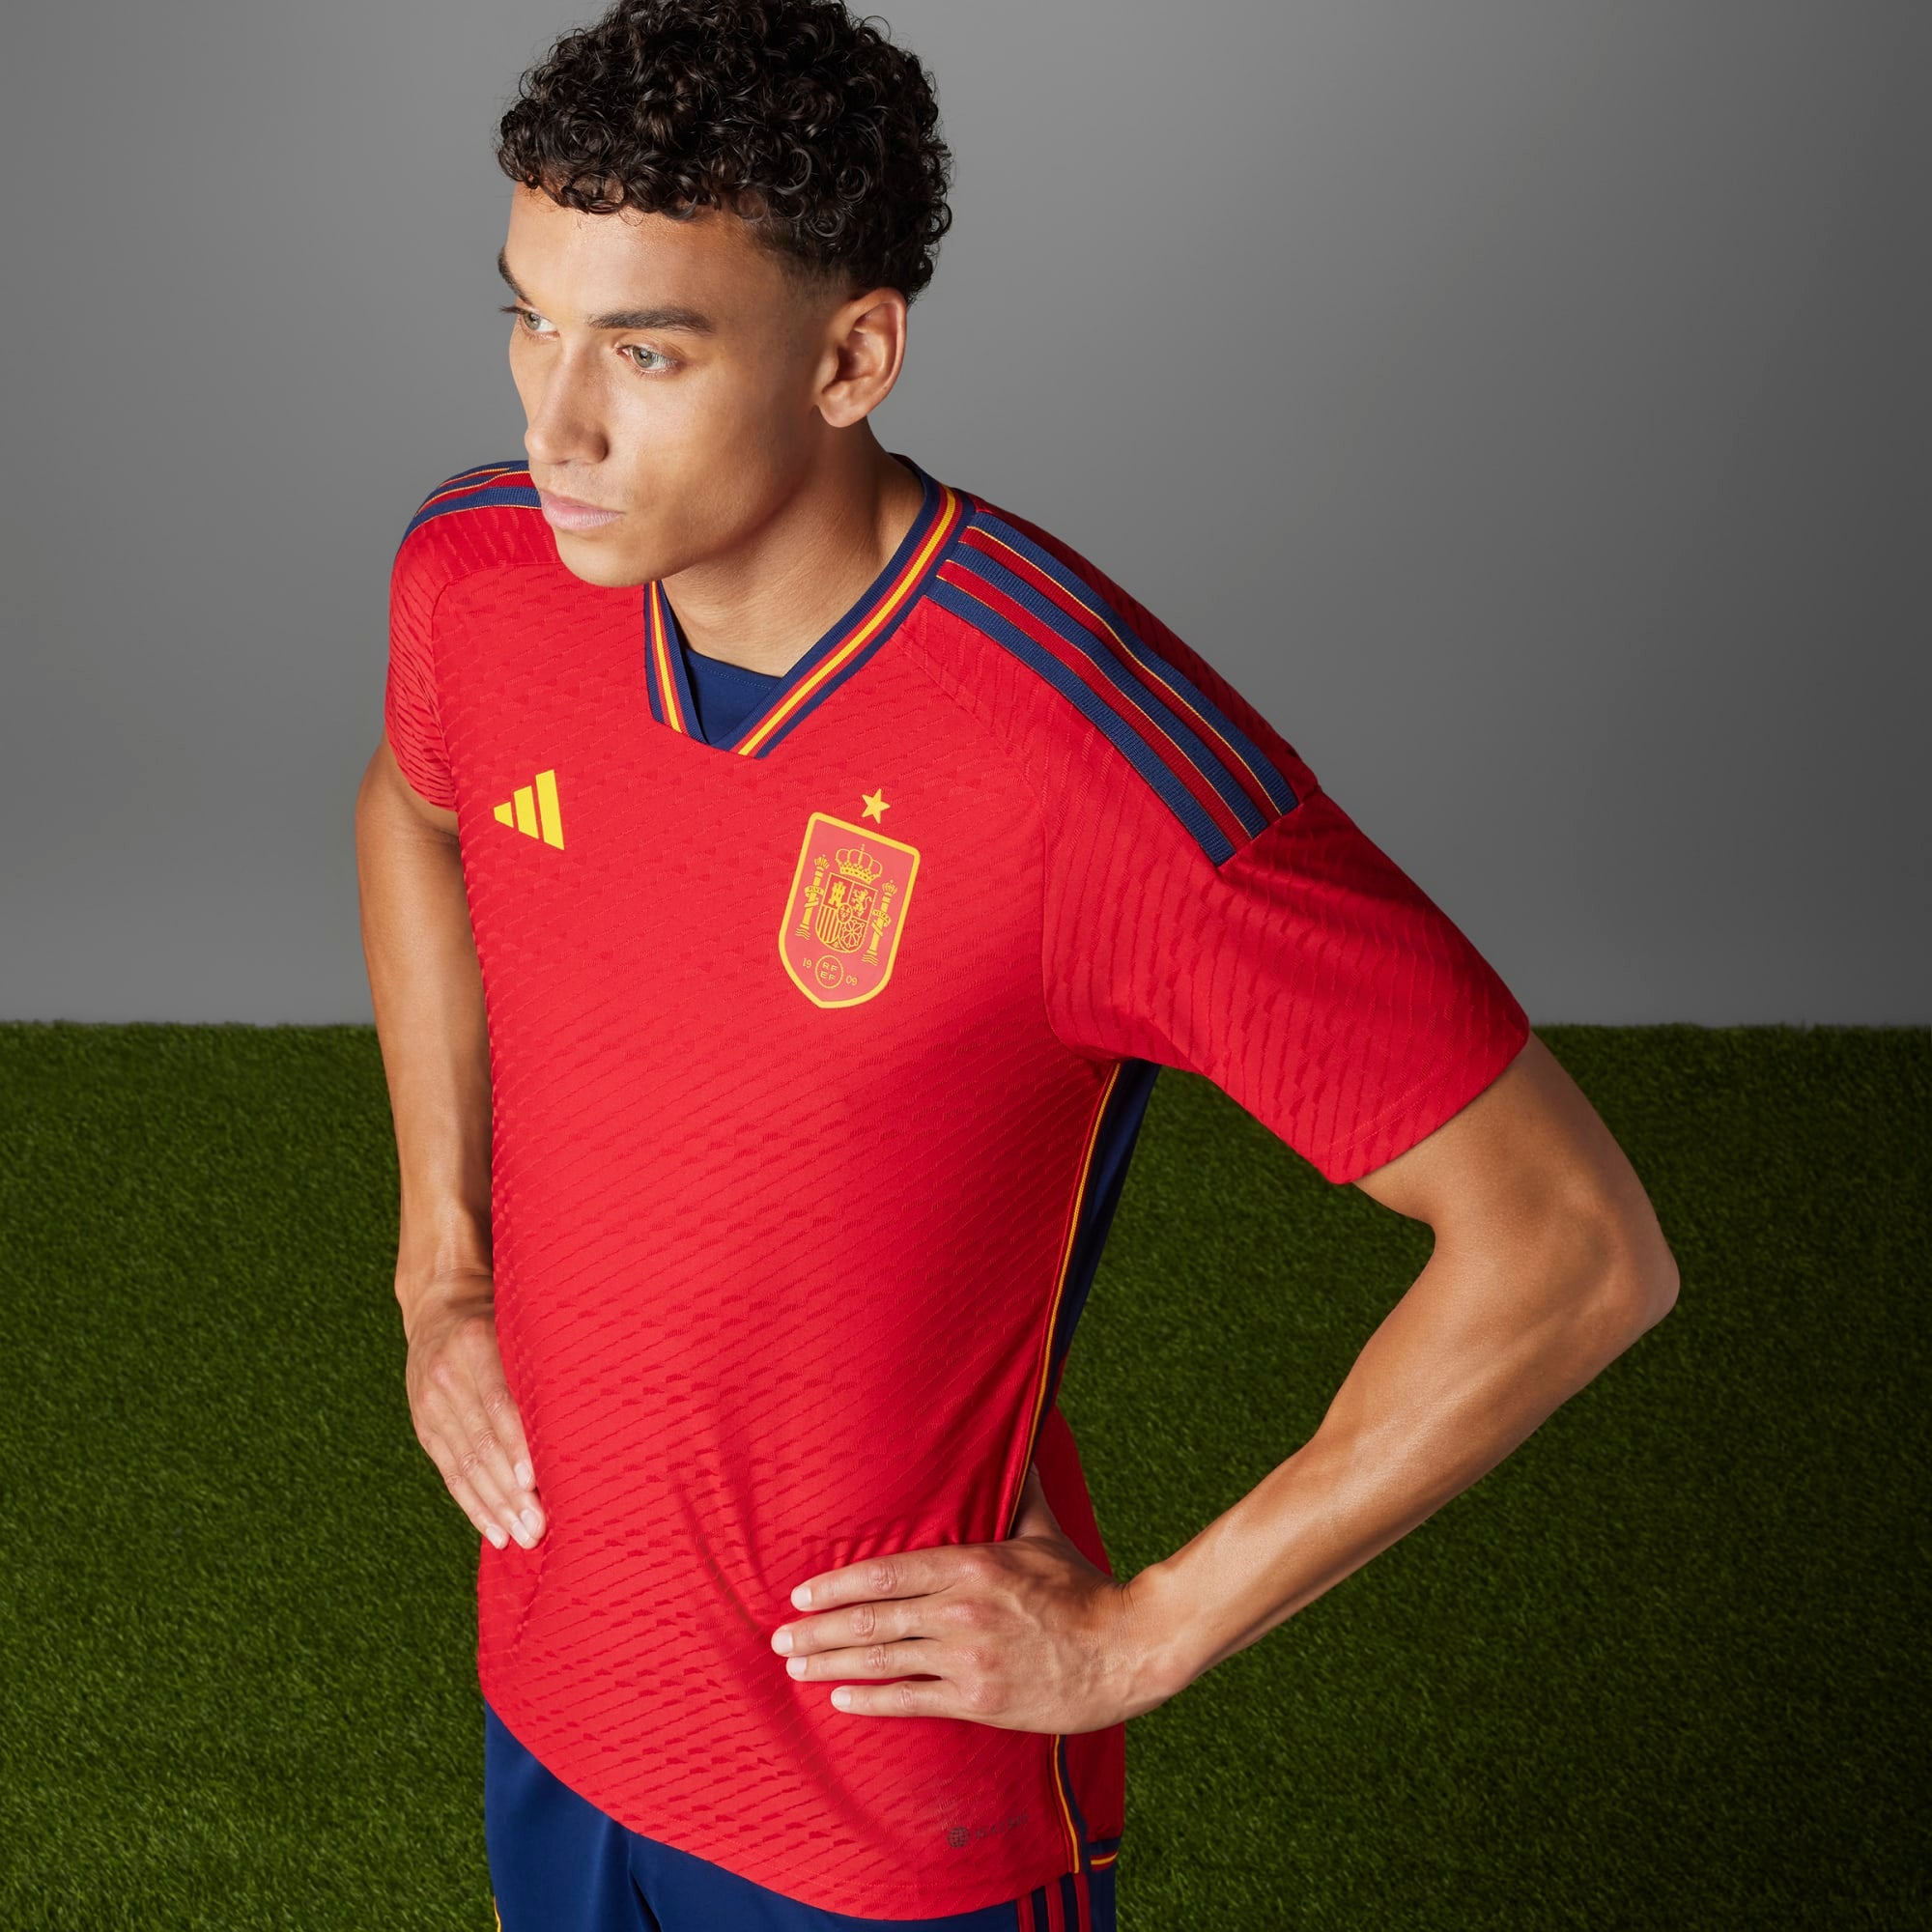 adidas SPAIN 22 HOME AUTHENTIC JERSEY